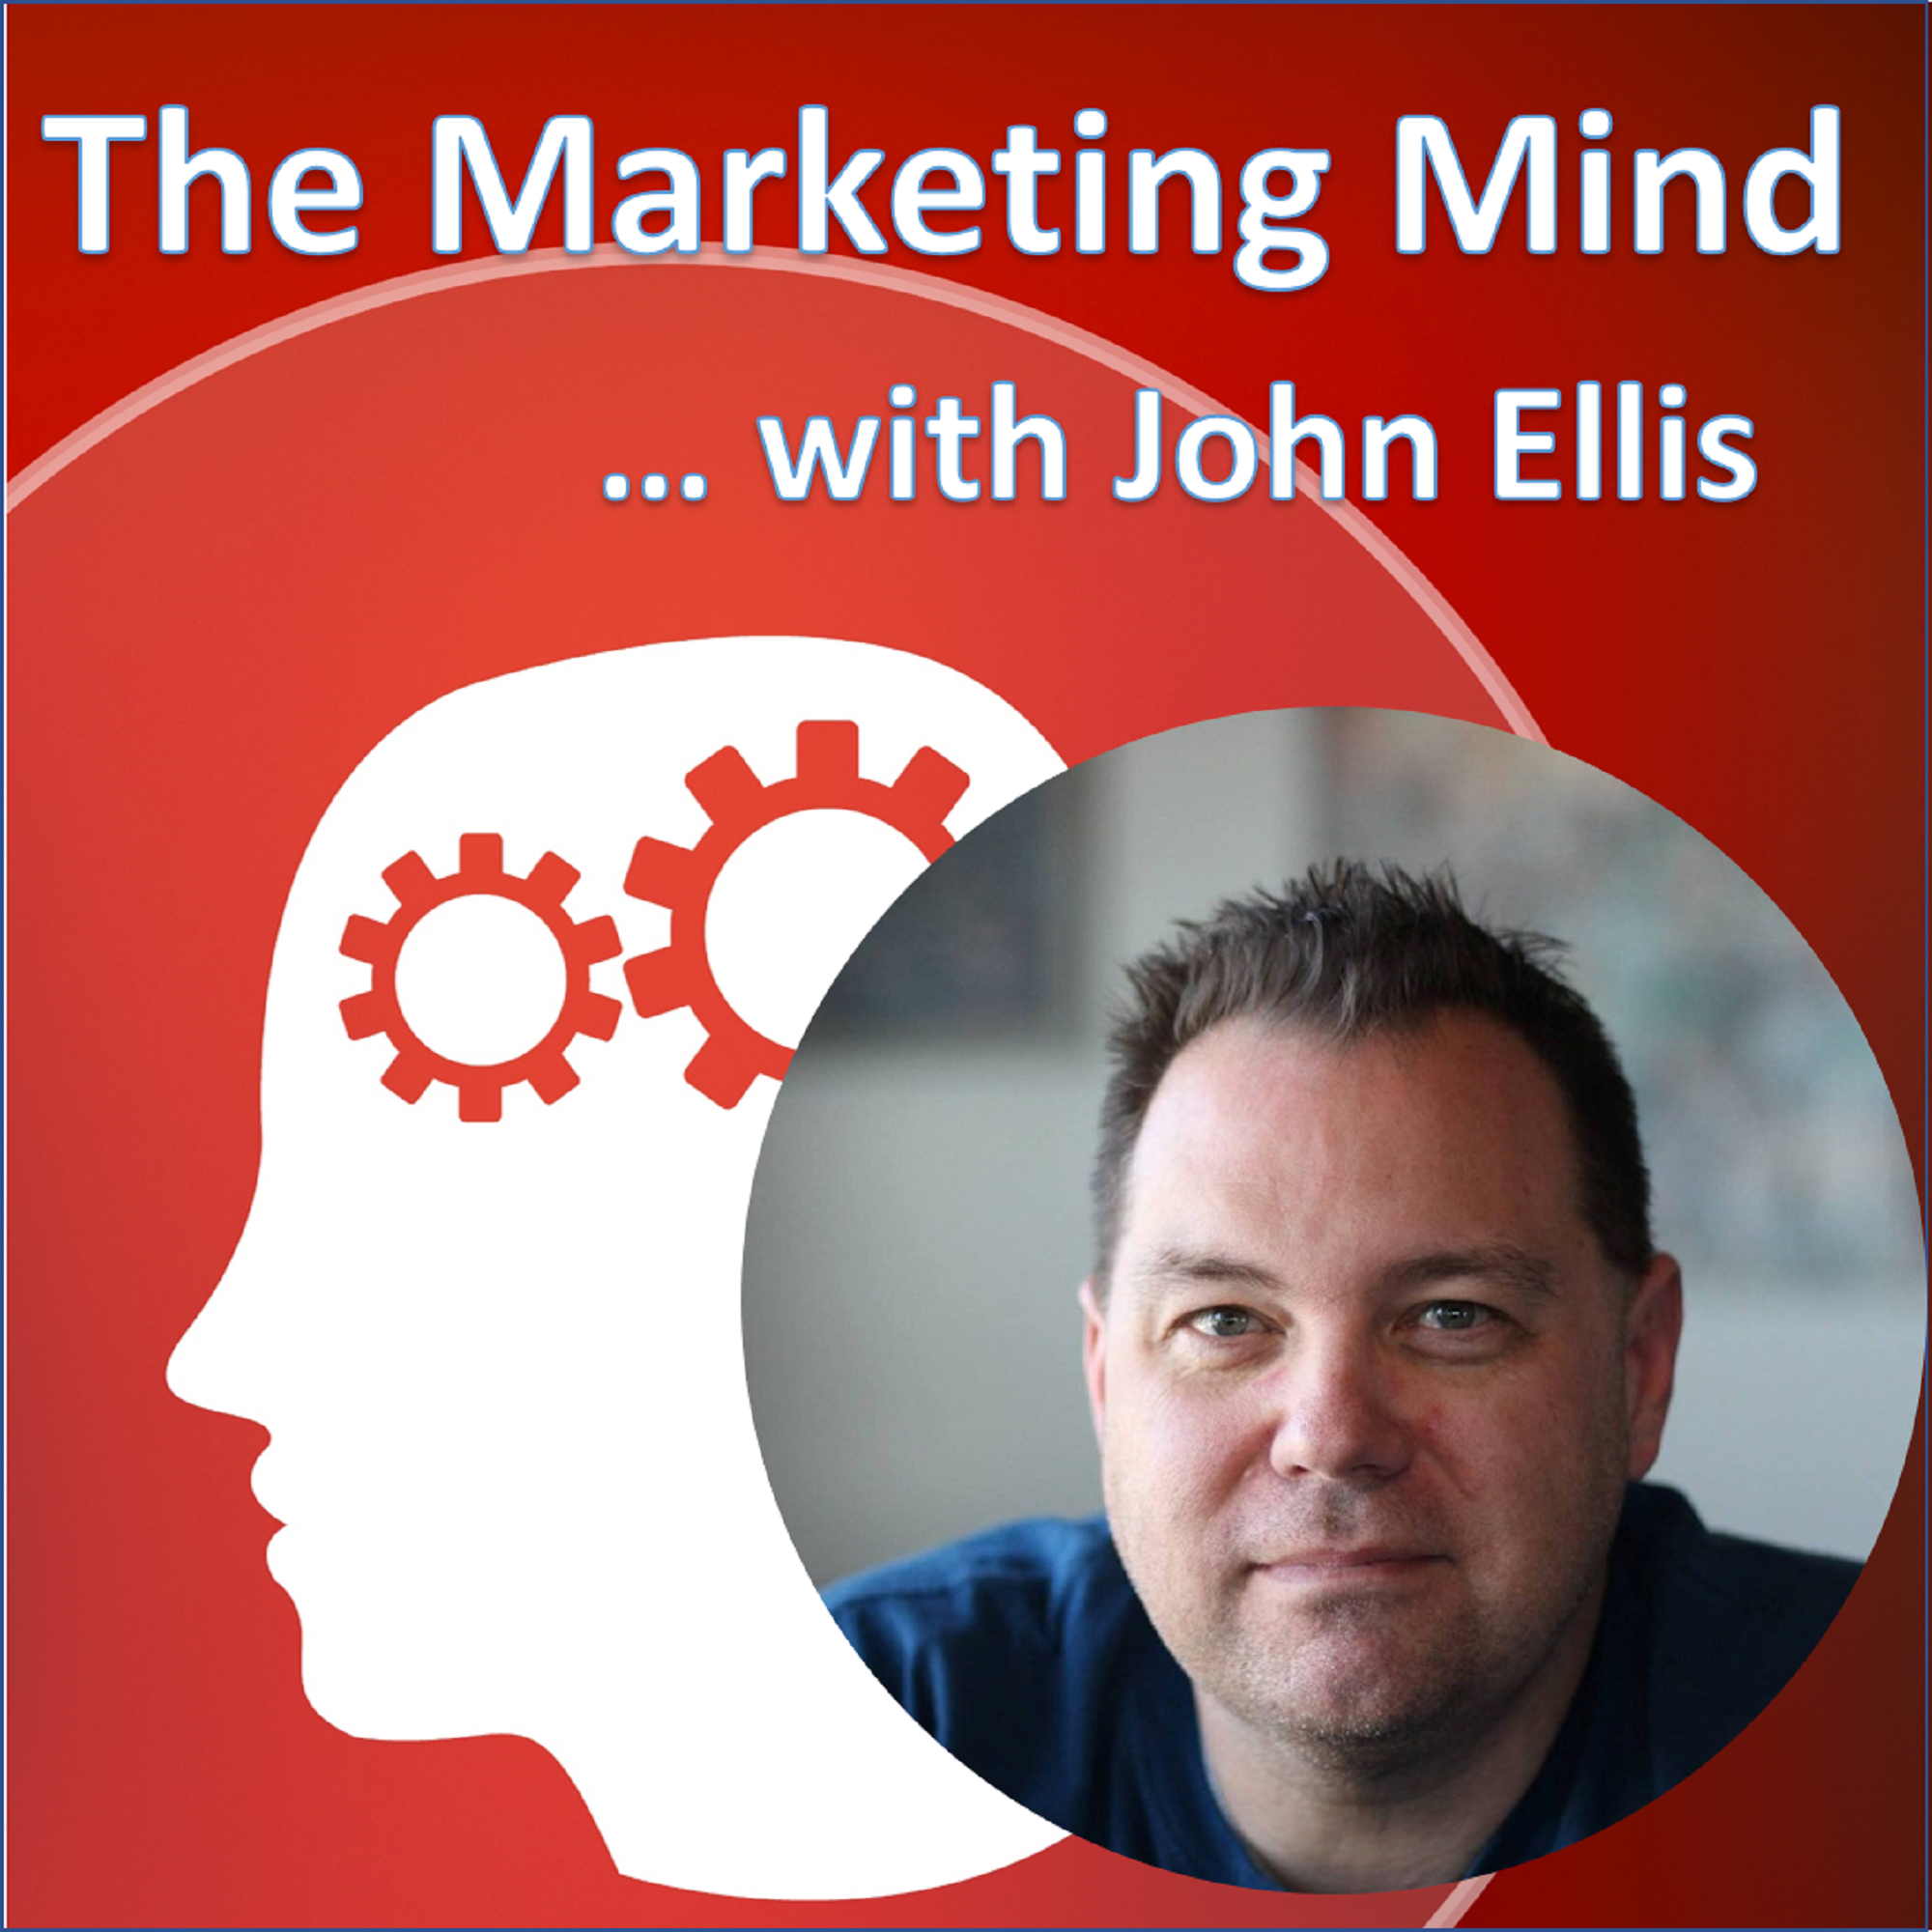 Welcome to the Marketing Mind